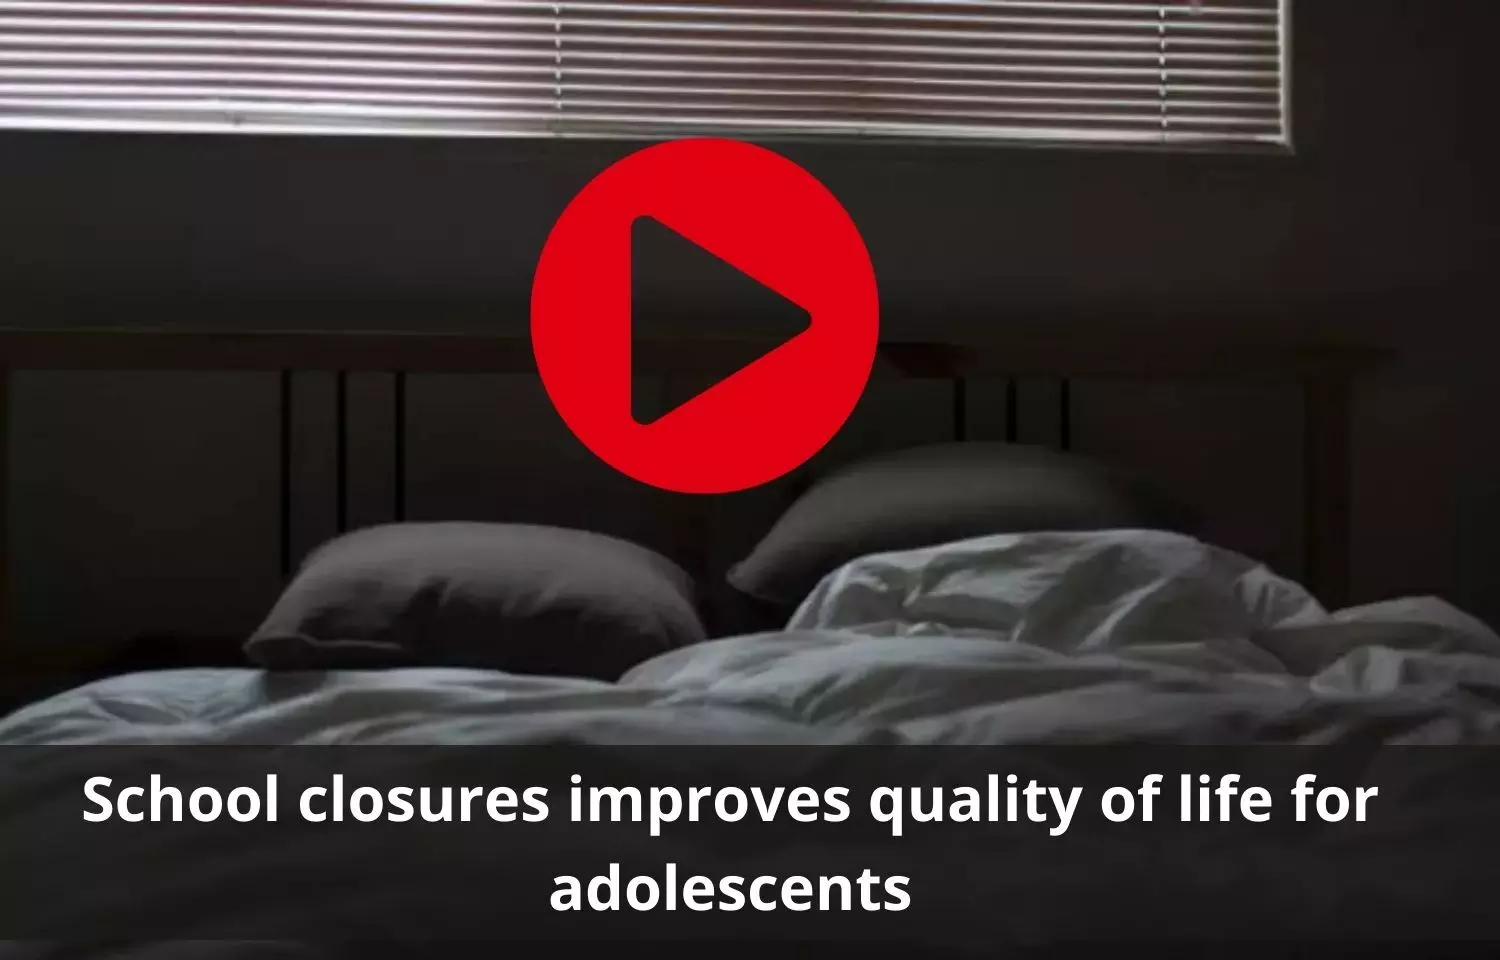 School closures greatly improved quality of life in school children